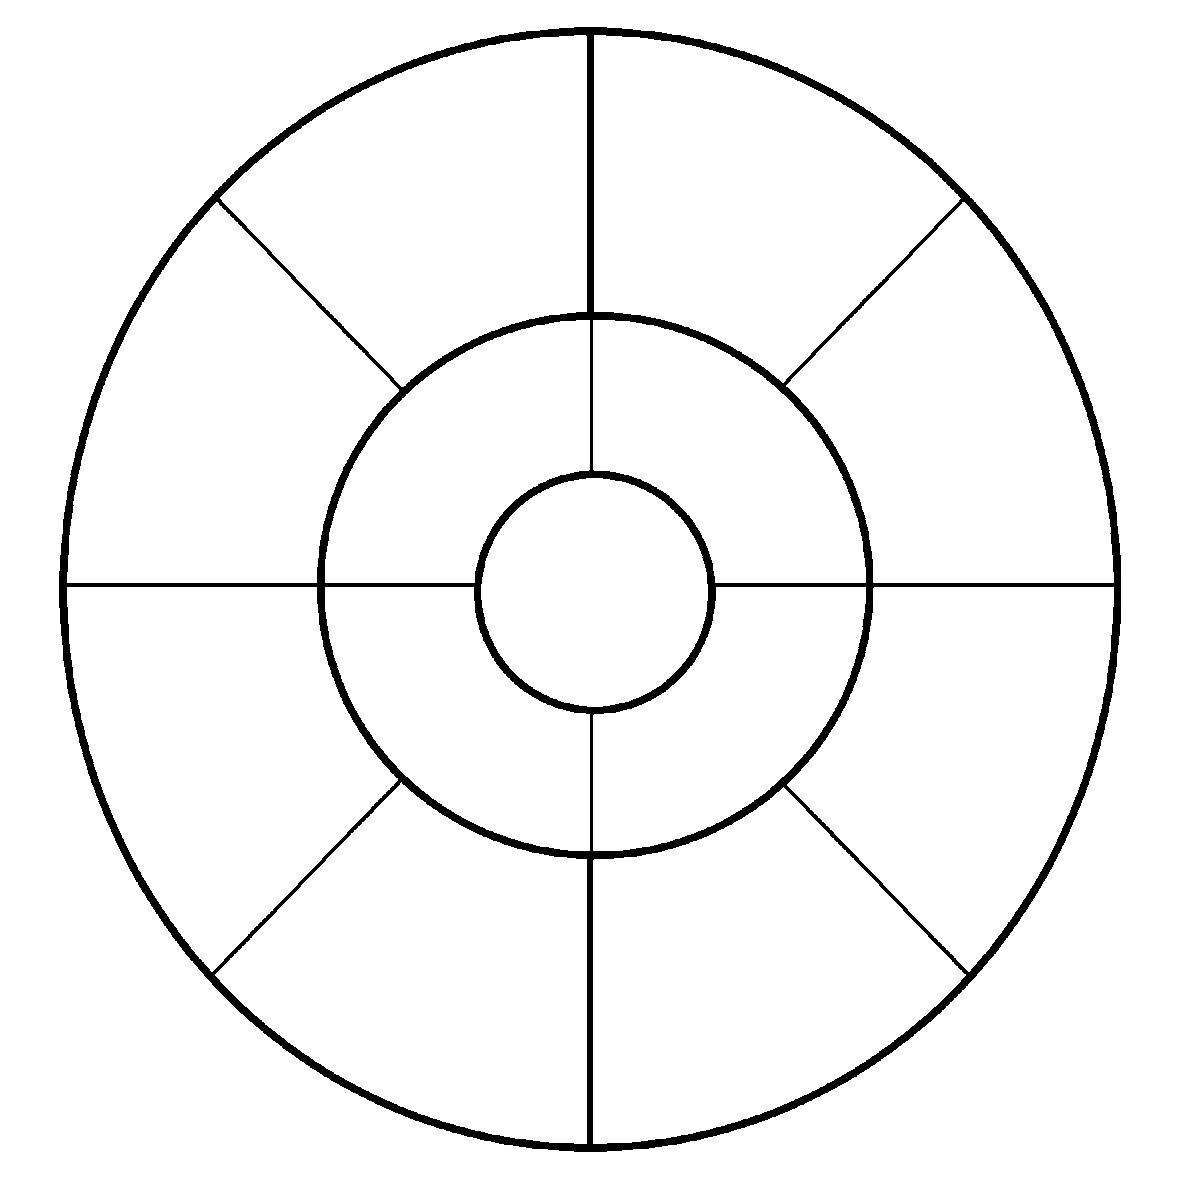 @pillowbugz is it this one? (it's a png) afaik the center and closer to the center is more integral to the character and the farther you go out the OC and character just have a couple of similarities